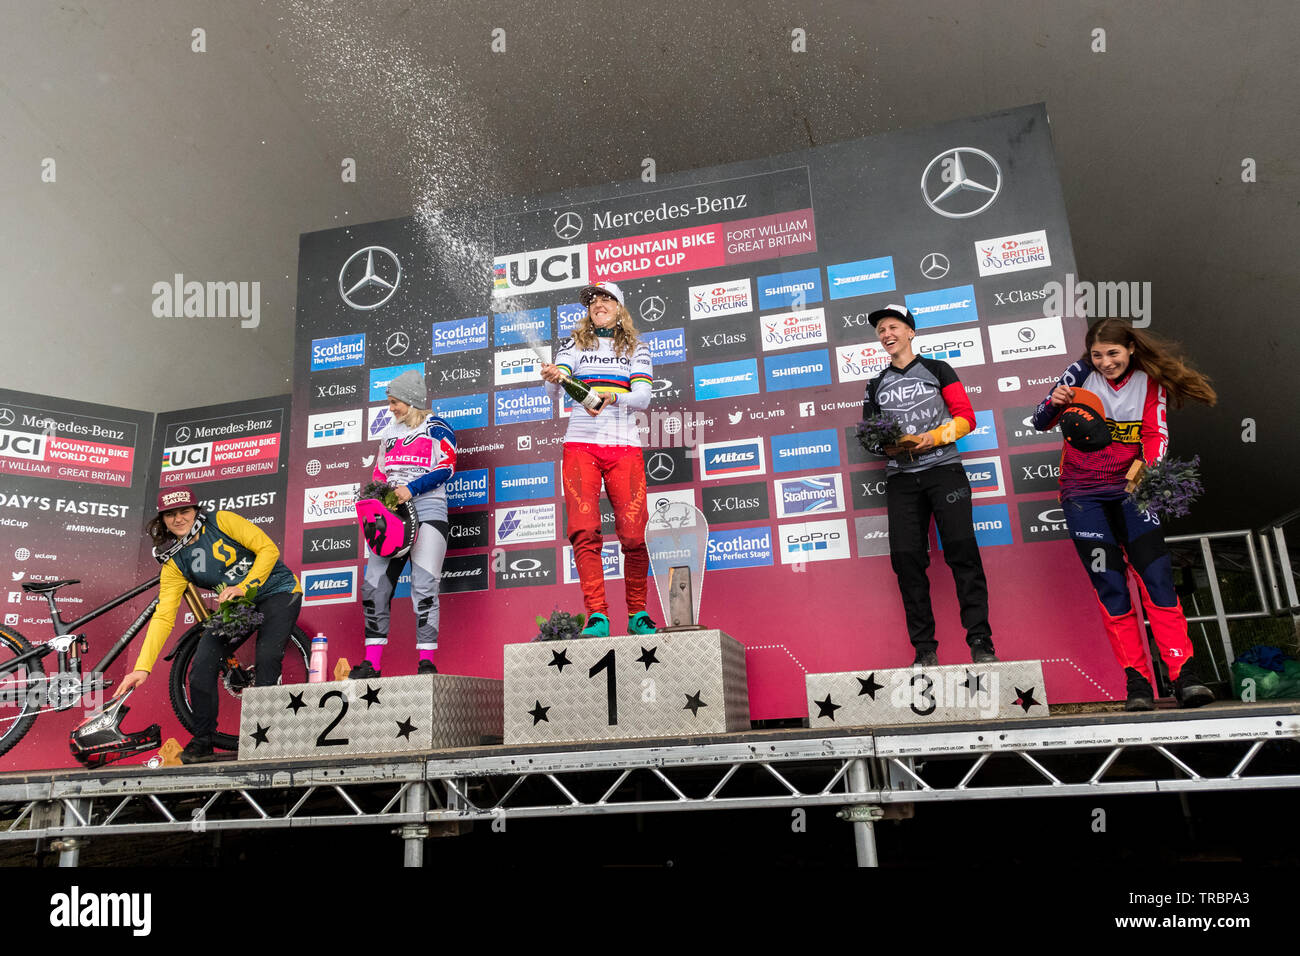 Fort William, Scotland, UK. 2nd June, 2019. UCI Mountain Bike World Cup - Rachel Atherton celebrating her victory in the Women's Elite Final. From left to right on the podium - Marine Cabirou (FRA), Tracey Hannah (AUS), Rachel Atherton (GBR), Nina Hoffmann (GER), Veronika Widmann (ITA) Credit: Kay Roxby/Alamy Live News Stock Photo